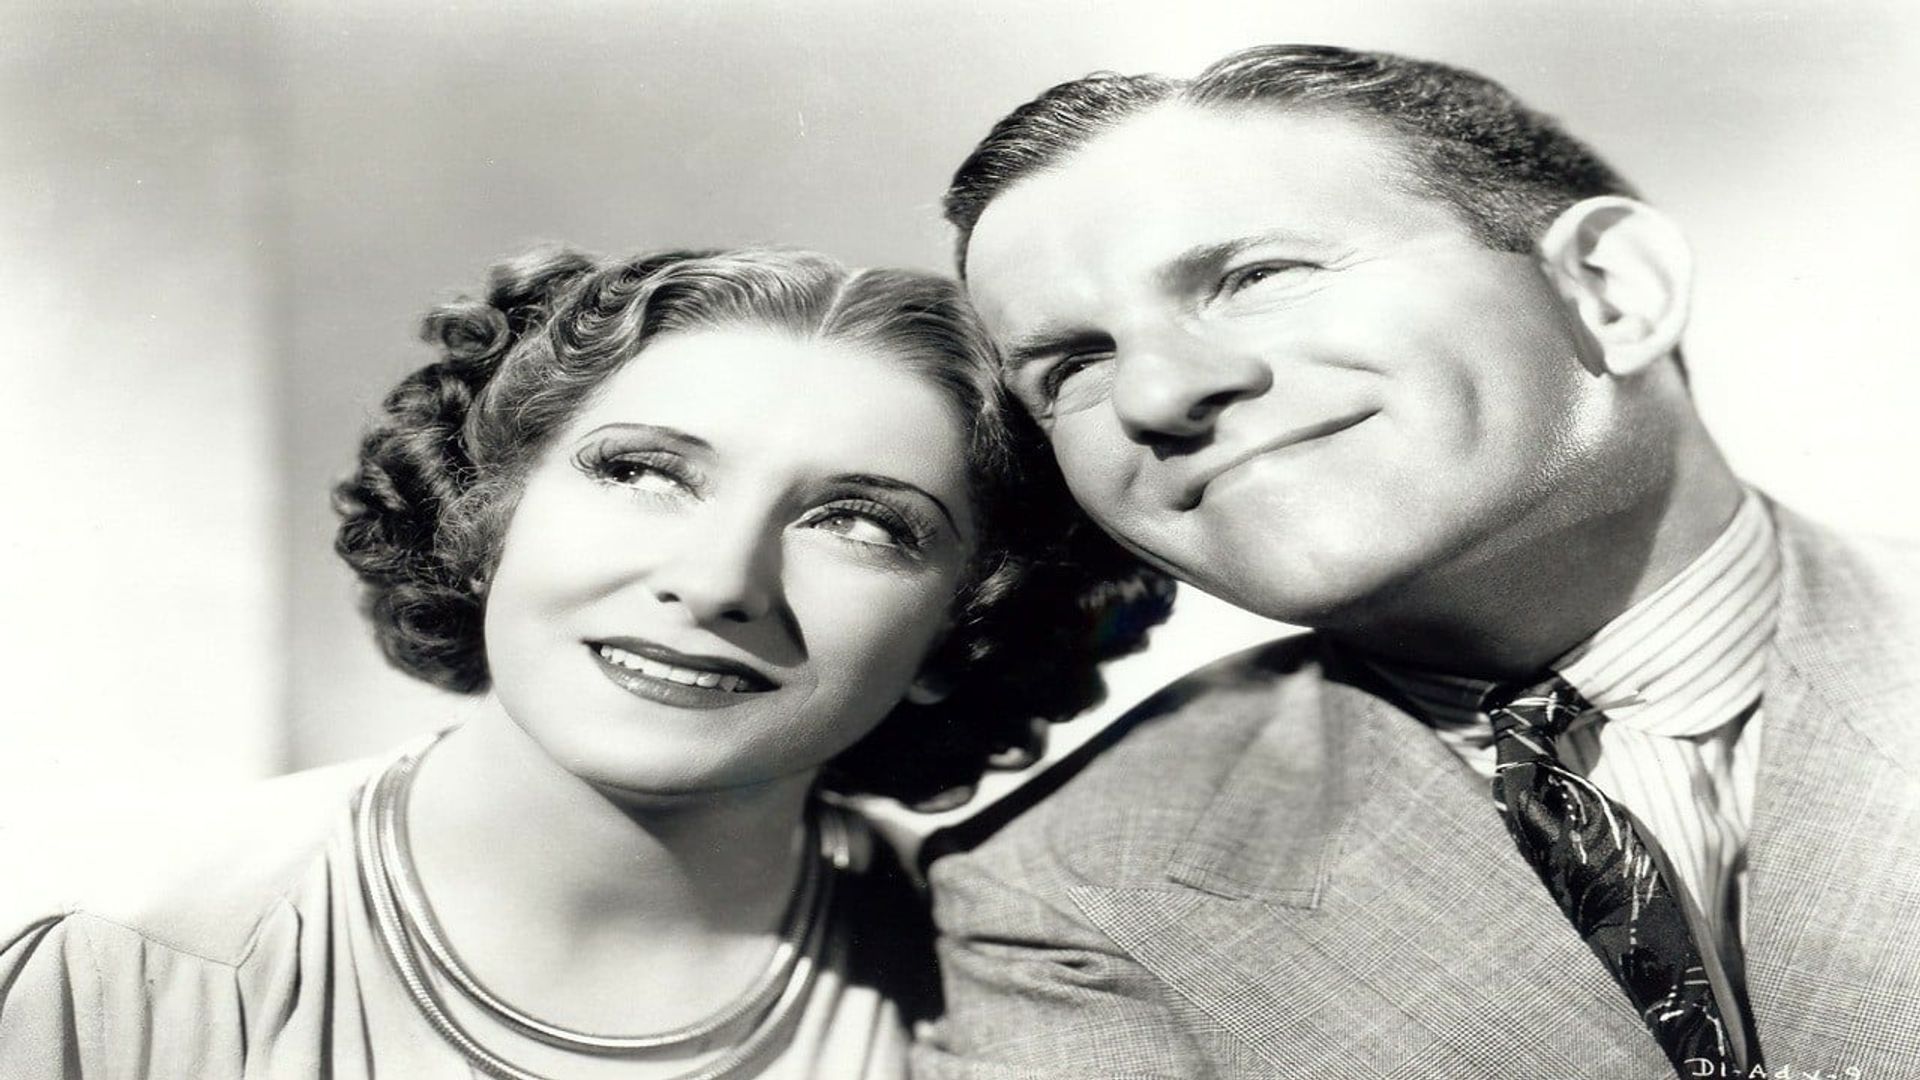 The George Burns and Gracie Allen Show background